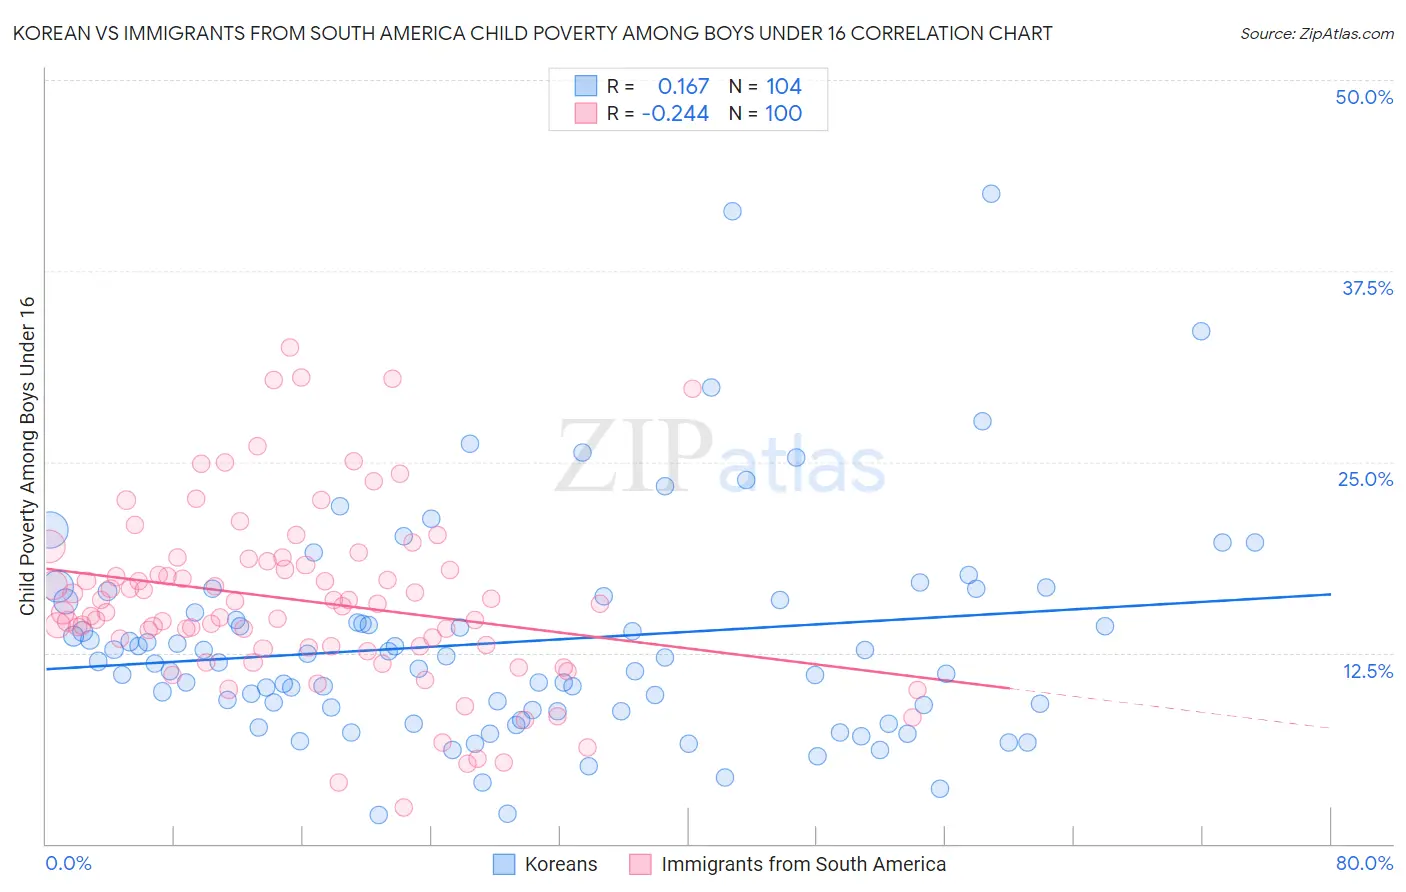 Korean vs Immigrants from South America Child Poverty Among Boys Under 16